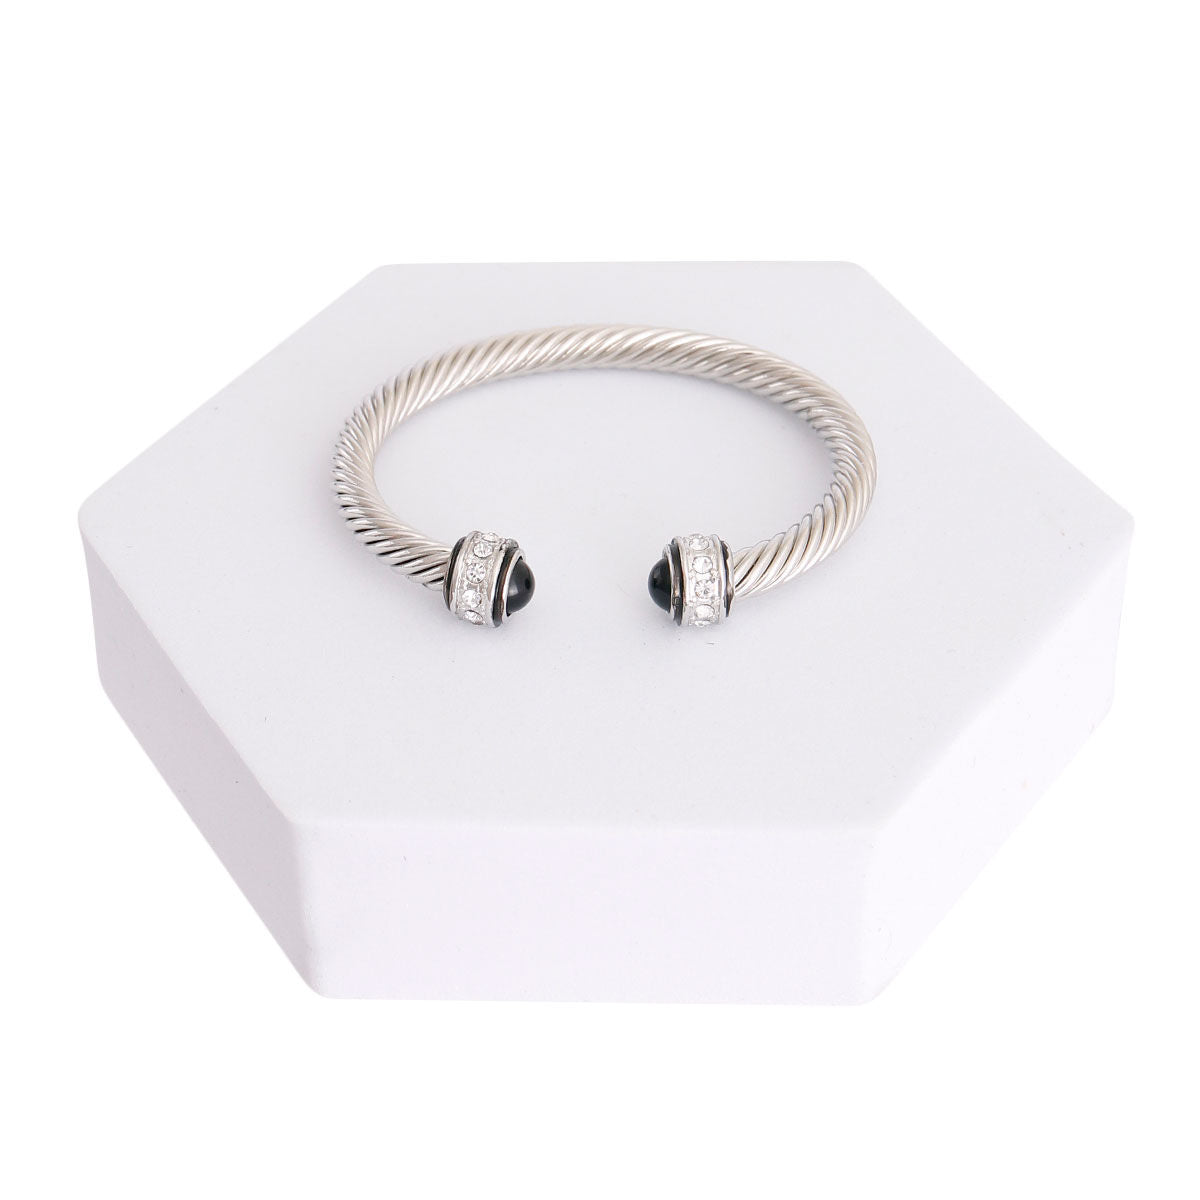 Black Pearl Twisted Cable Silver Bangle